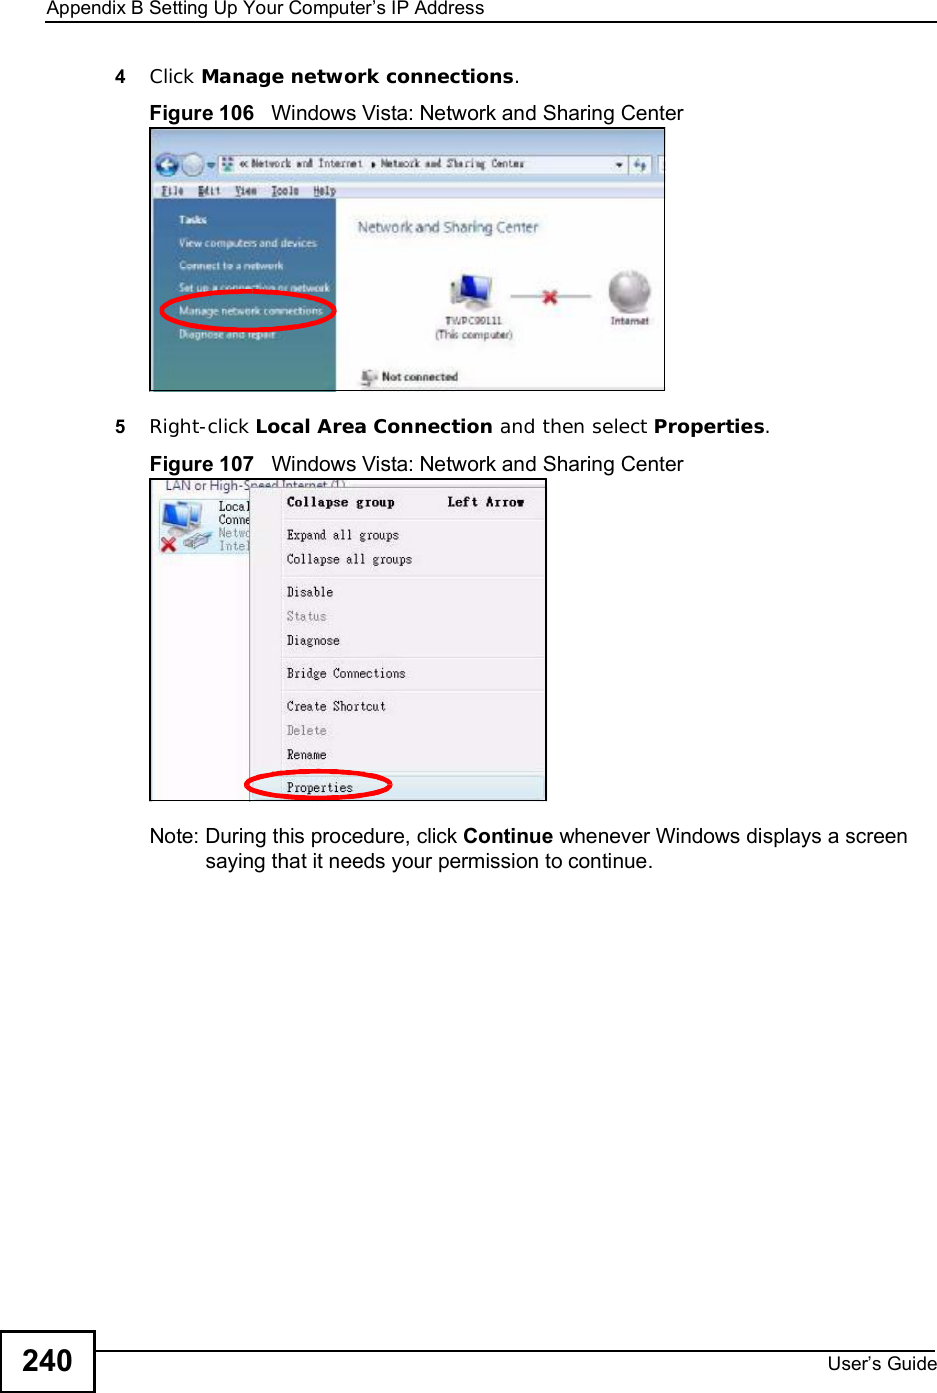 Appendix BSetting Up Your Computer s IP AddressUser s Guide2404Click Manage network connections.Figure 106   Windows Vista: Network and Sharing Center5Right-click Local Area Connection and then select Properties.Figure 107   Windows Vista: Network and Sharing CenterNote: During this procedure, click Continue whenever Windows displays a screen saying that it needs your permission to continue.